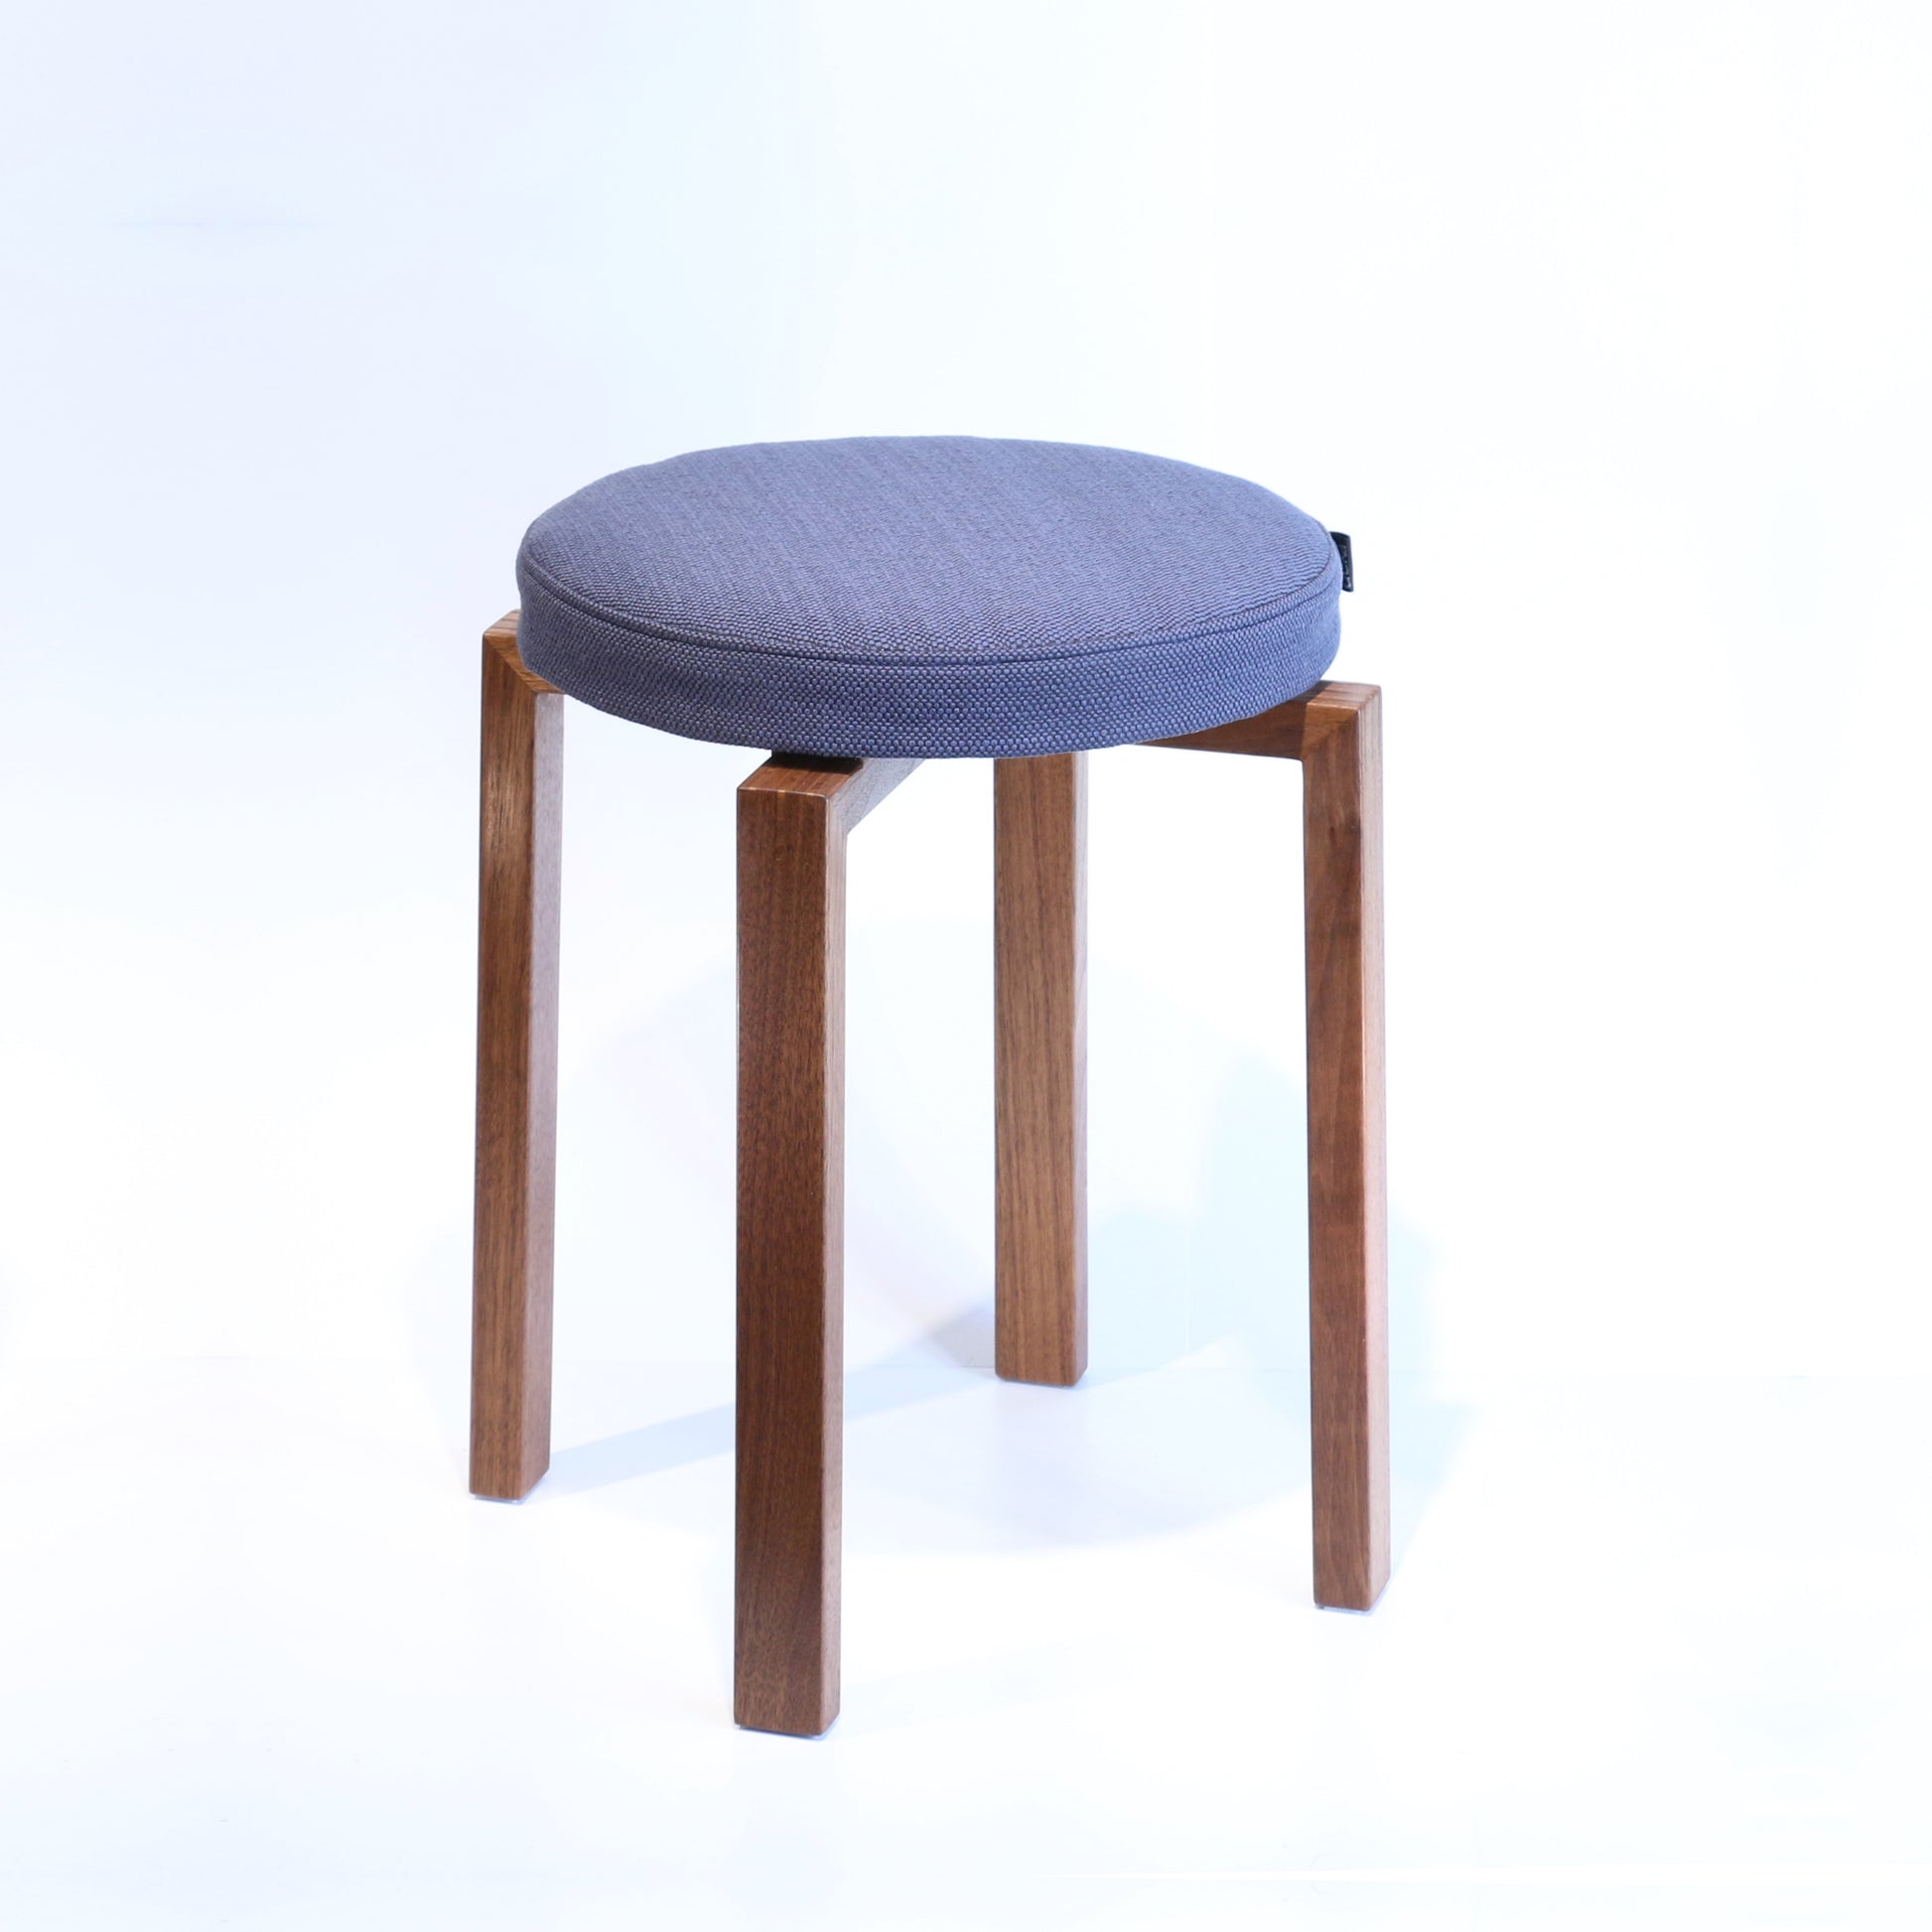 Seat pad for stool by Deka